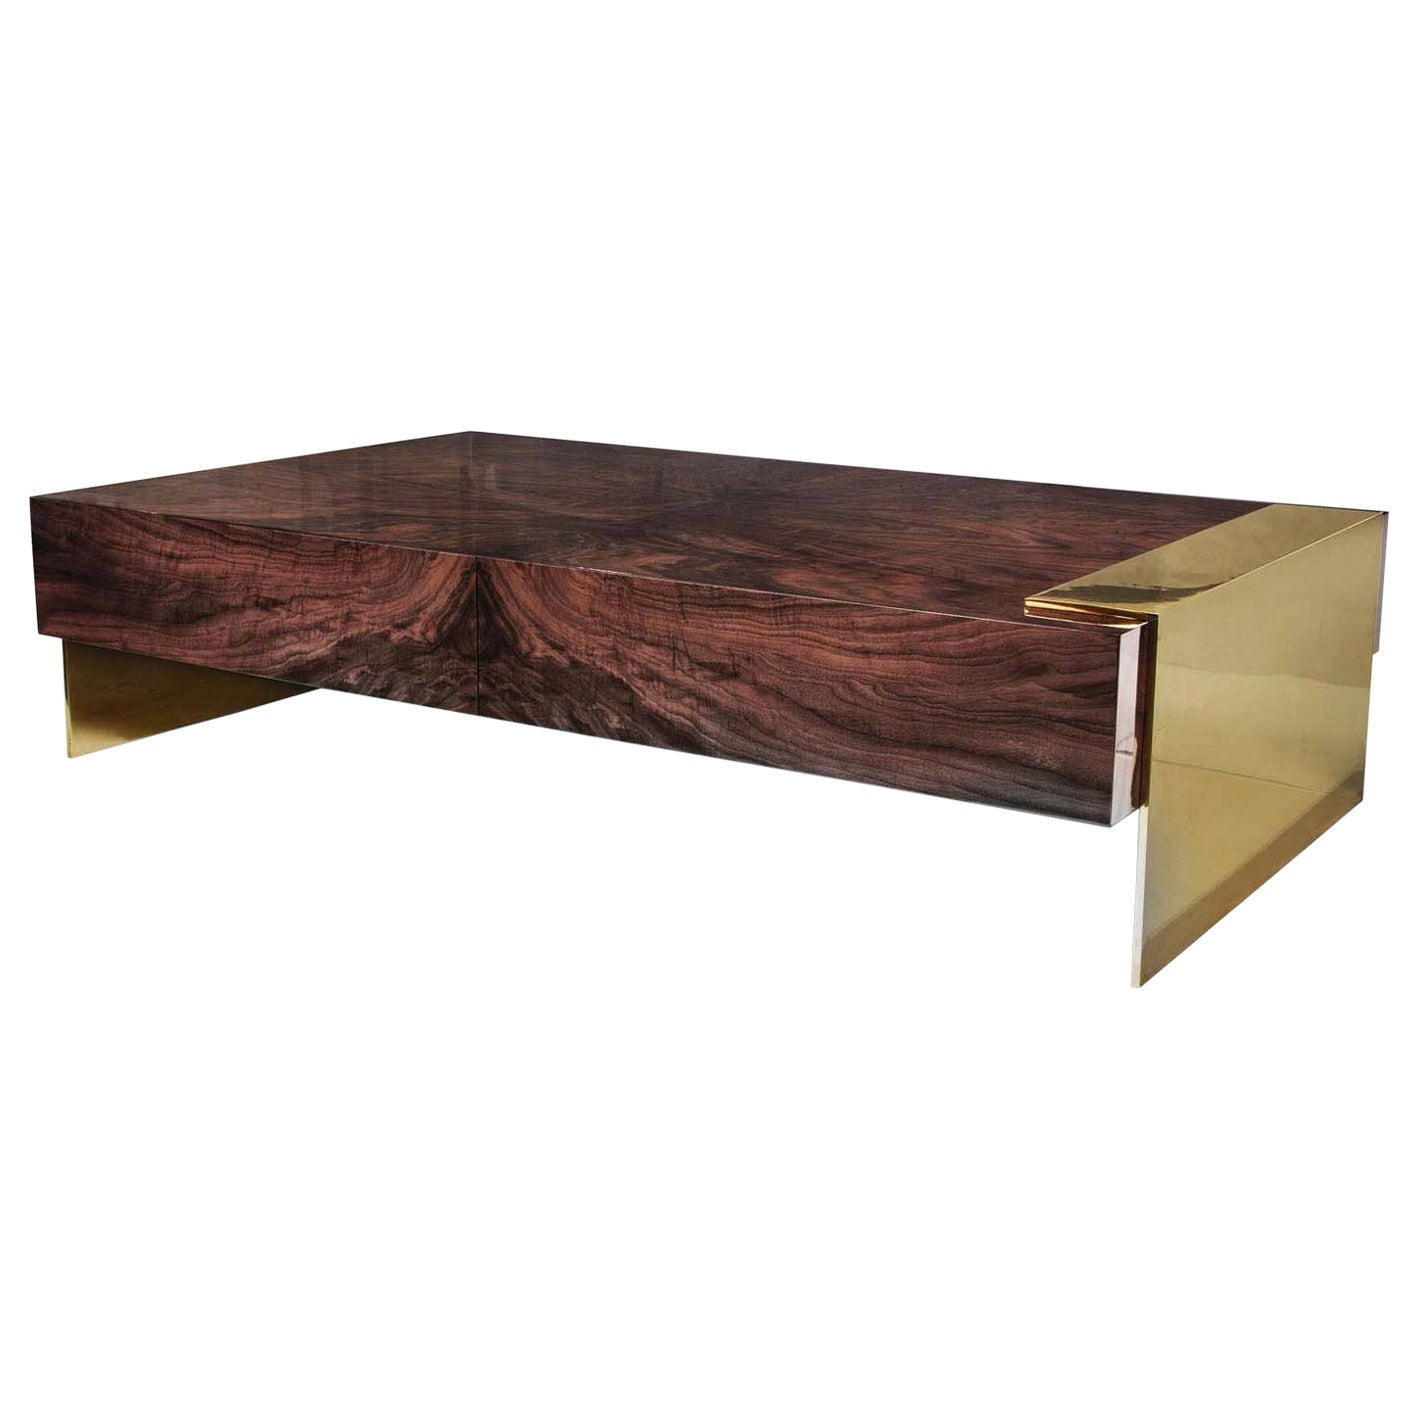 Judd Coffee Table For Sale